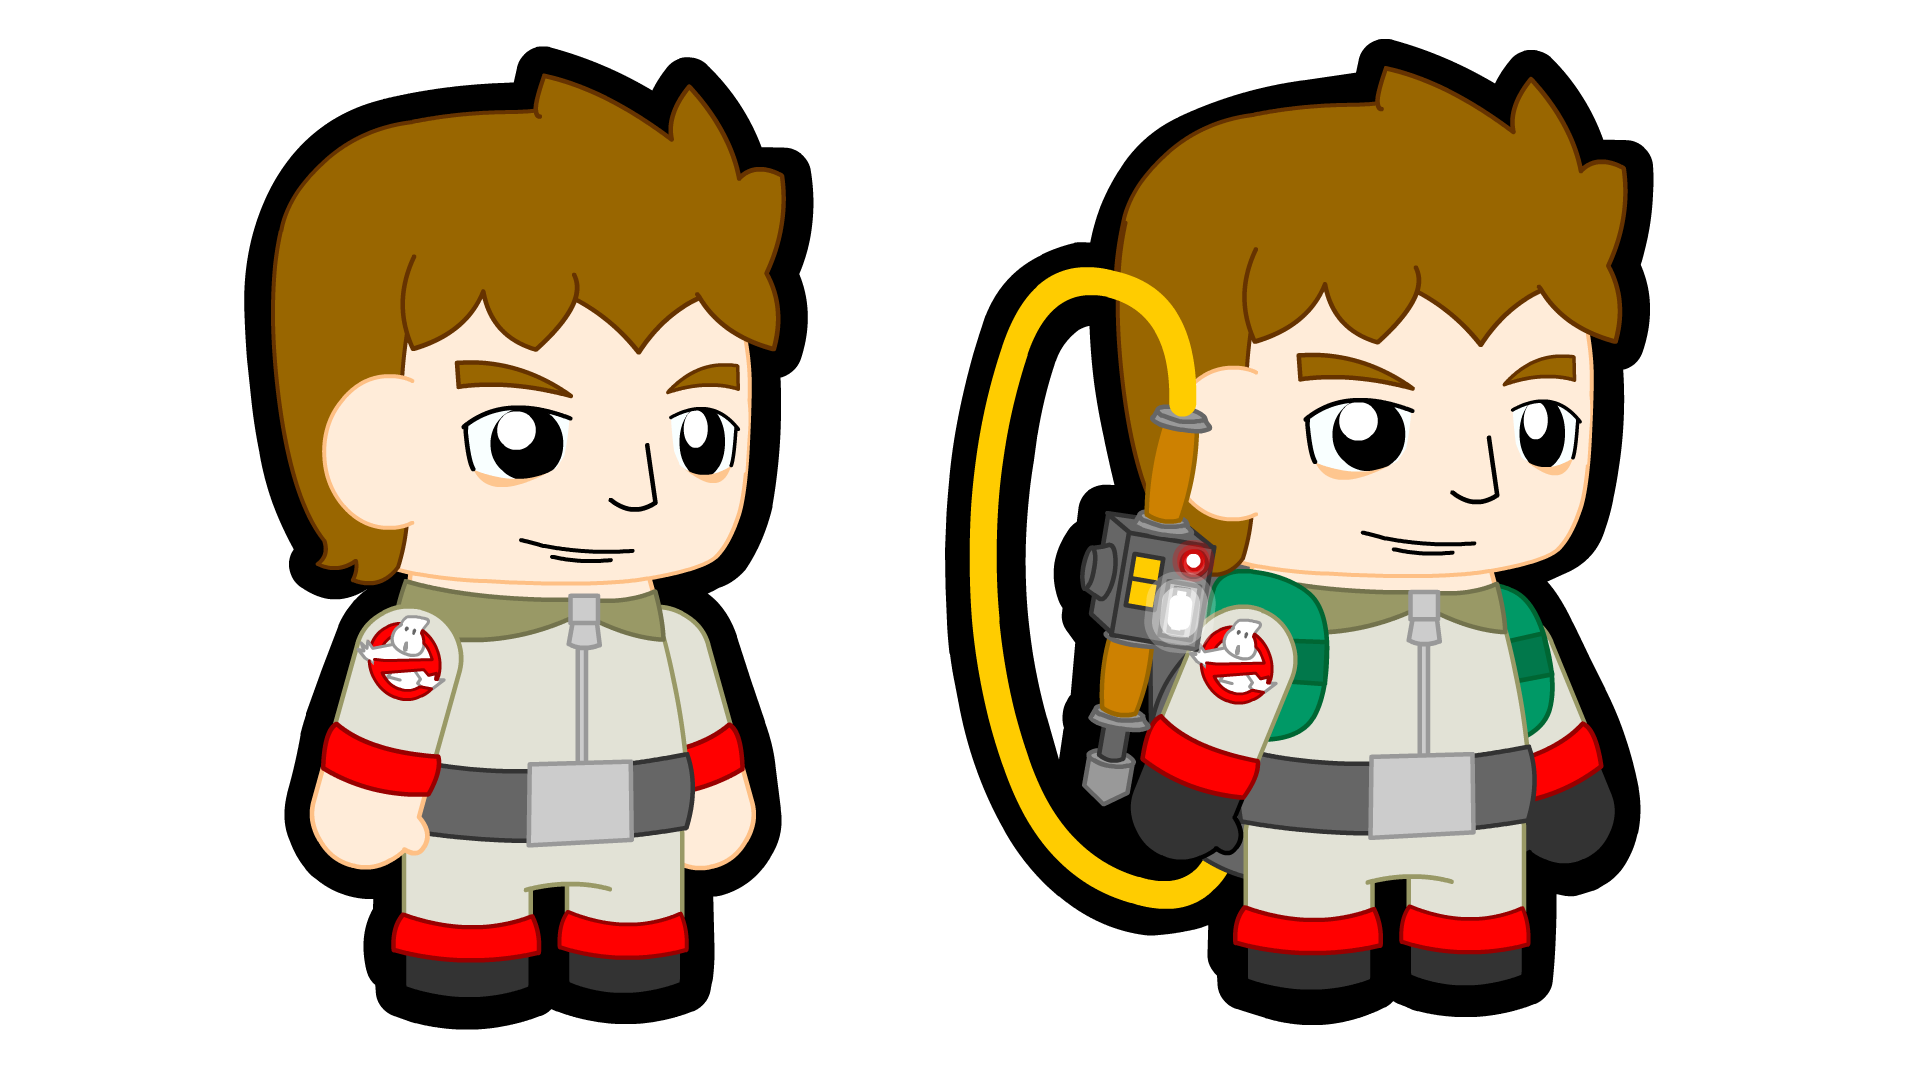 Ghostbusters style peter venkman. Writer clipart storybook